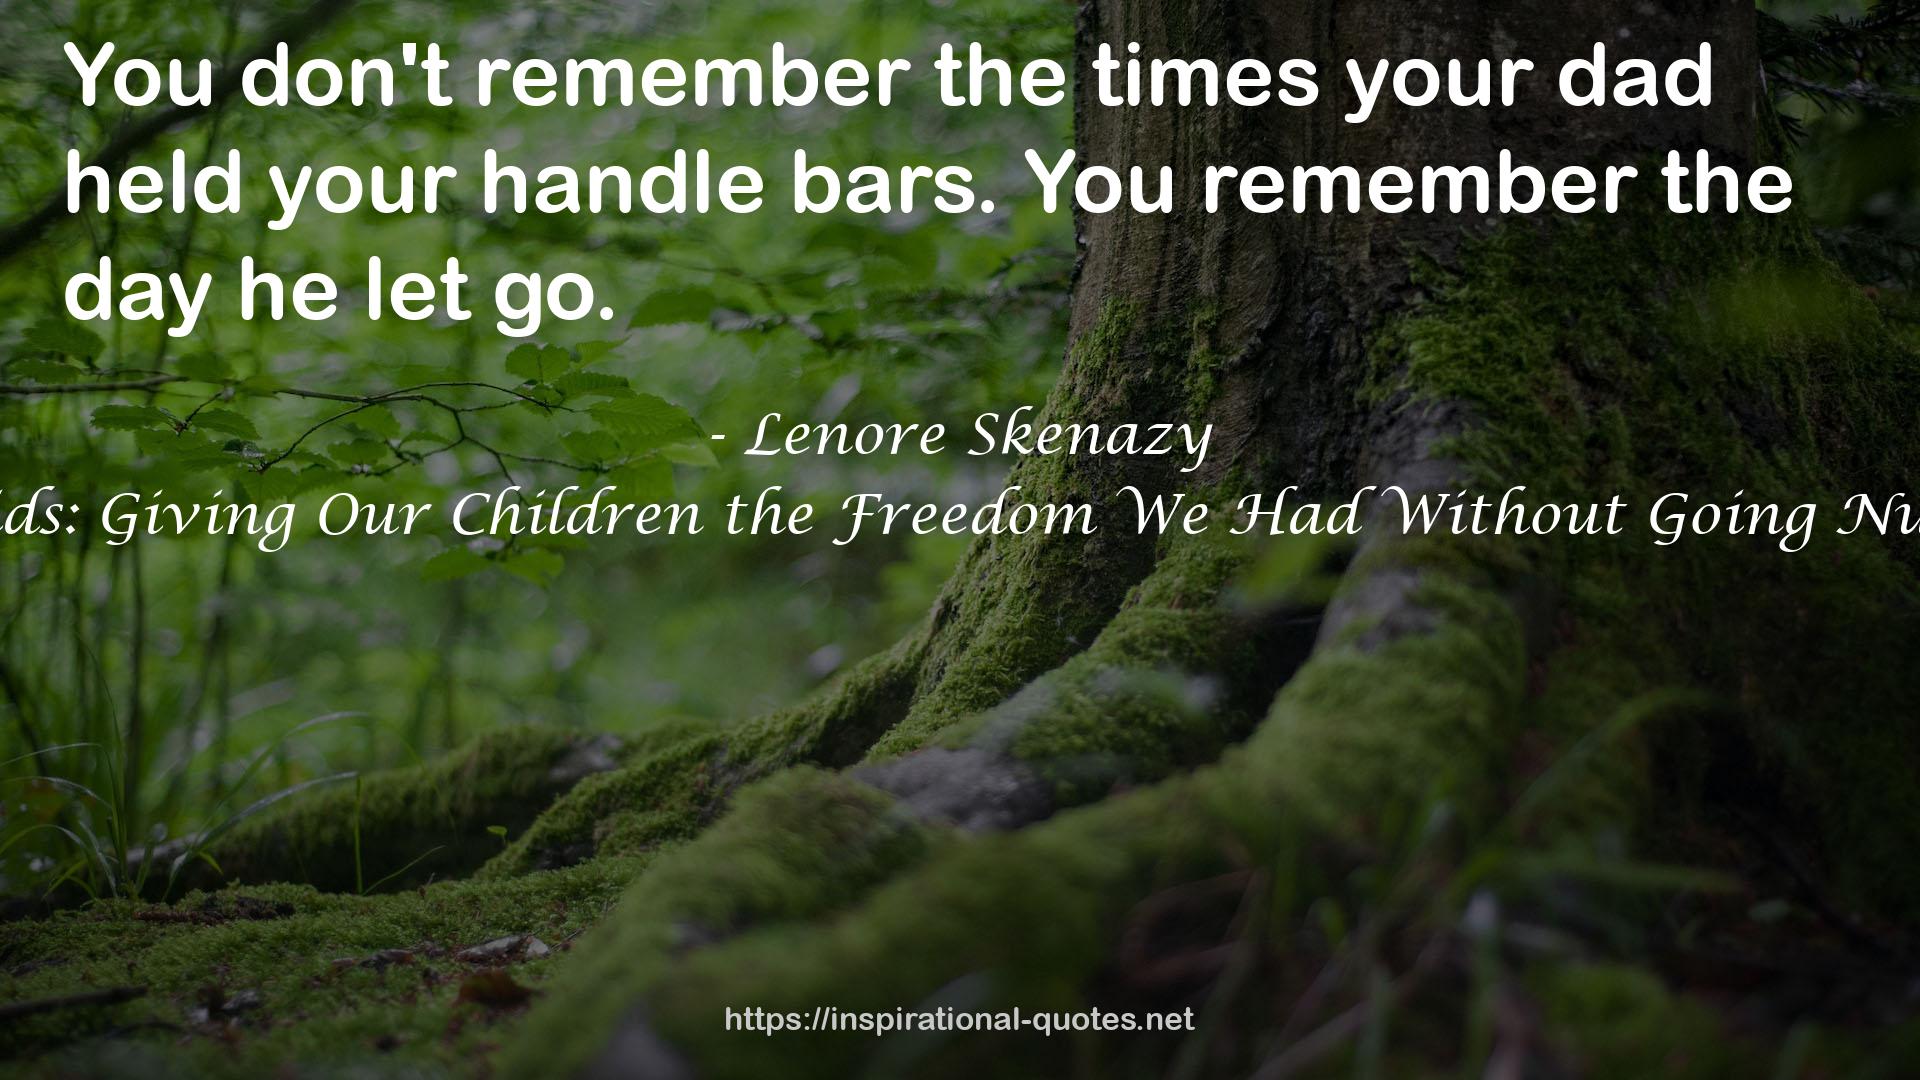 Free-Range Kids: Giving Our Children the Freedom We Had Without Going Nuts with Worry QUOTES